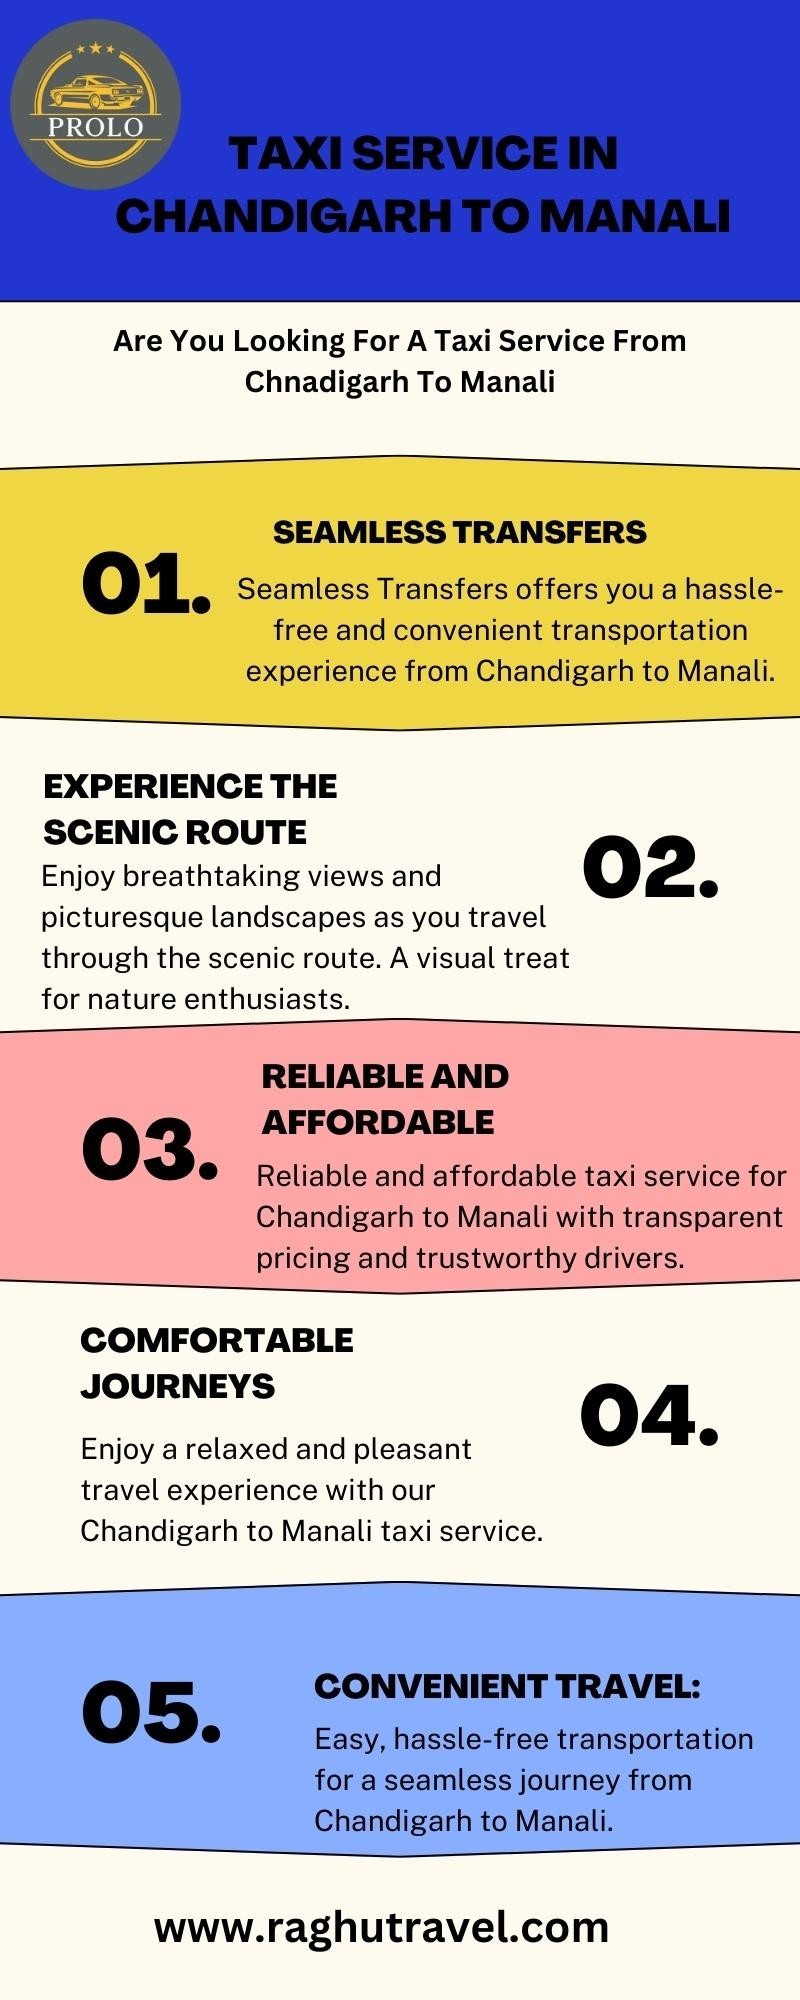 Chandigarh to Manali Taxi Service: Convenient and Reliable Transportation for Your Journey